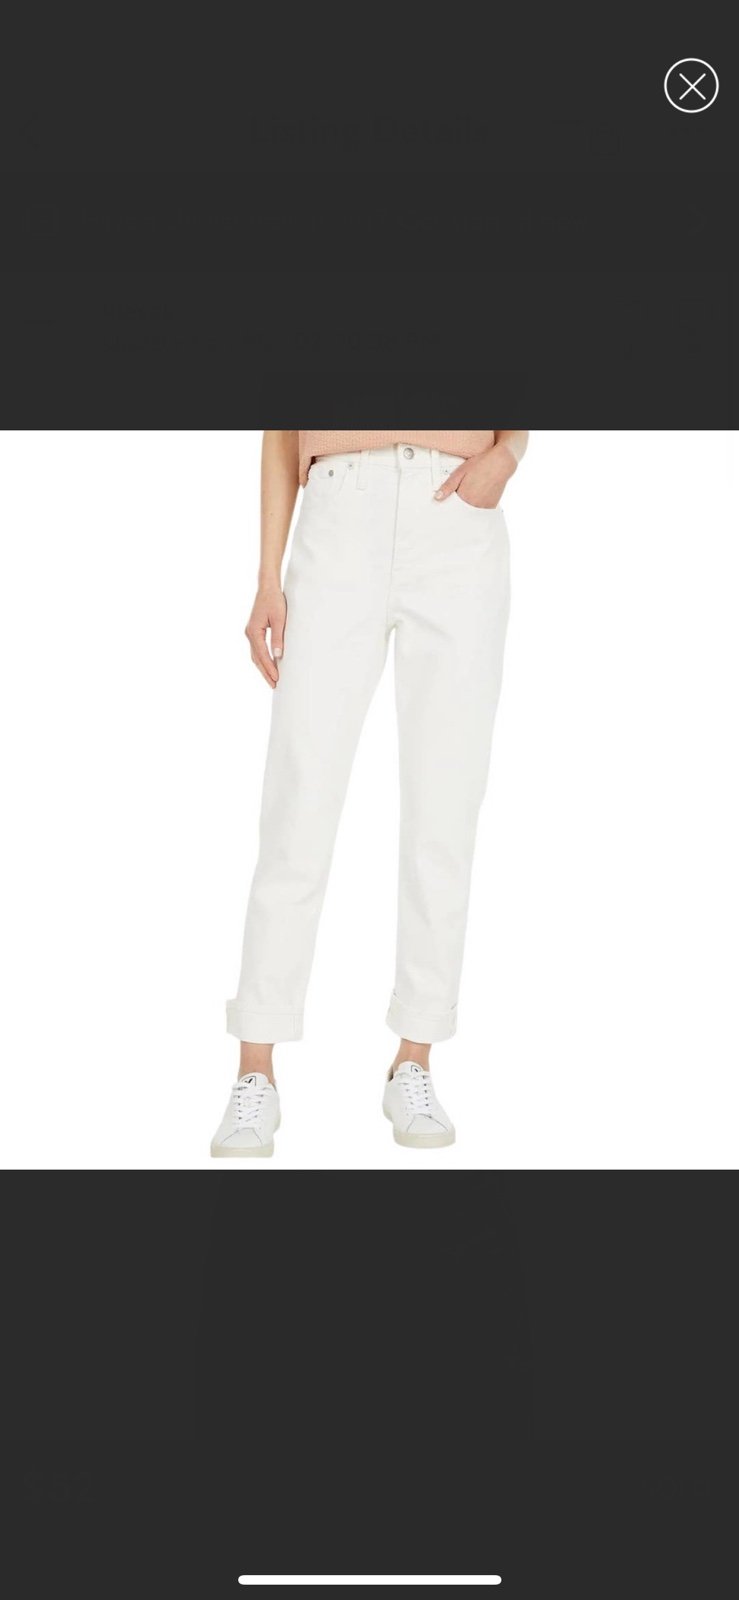 Simple Madewell the highrise slim boy jean nwt 25T jR1s